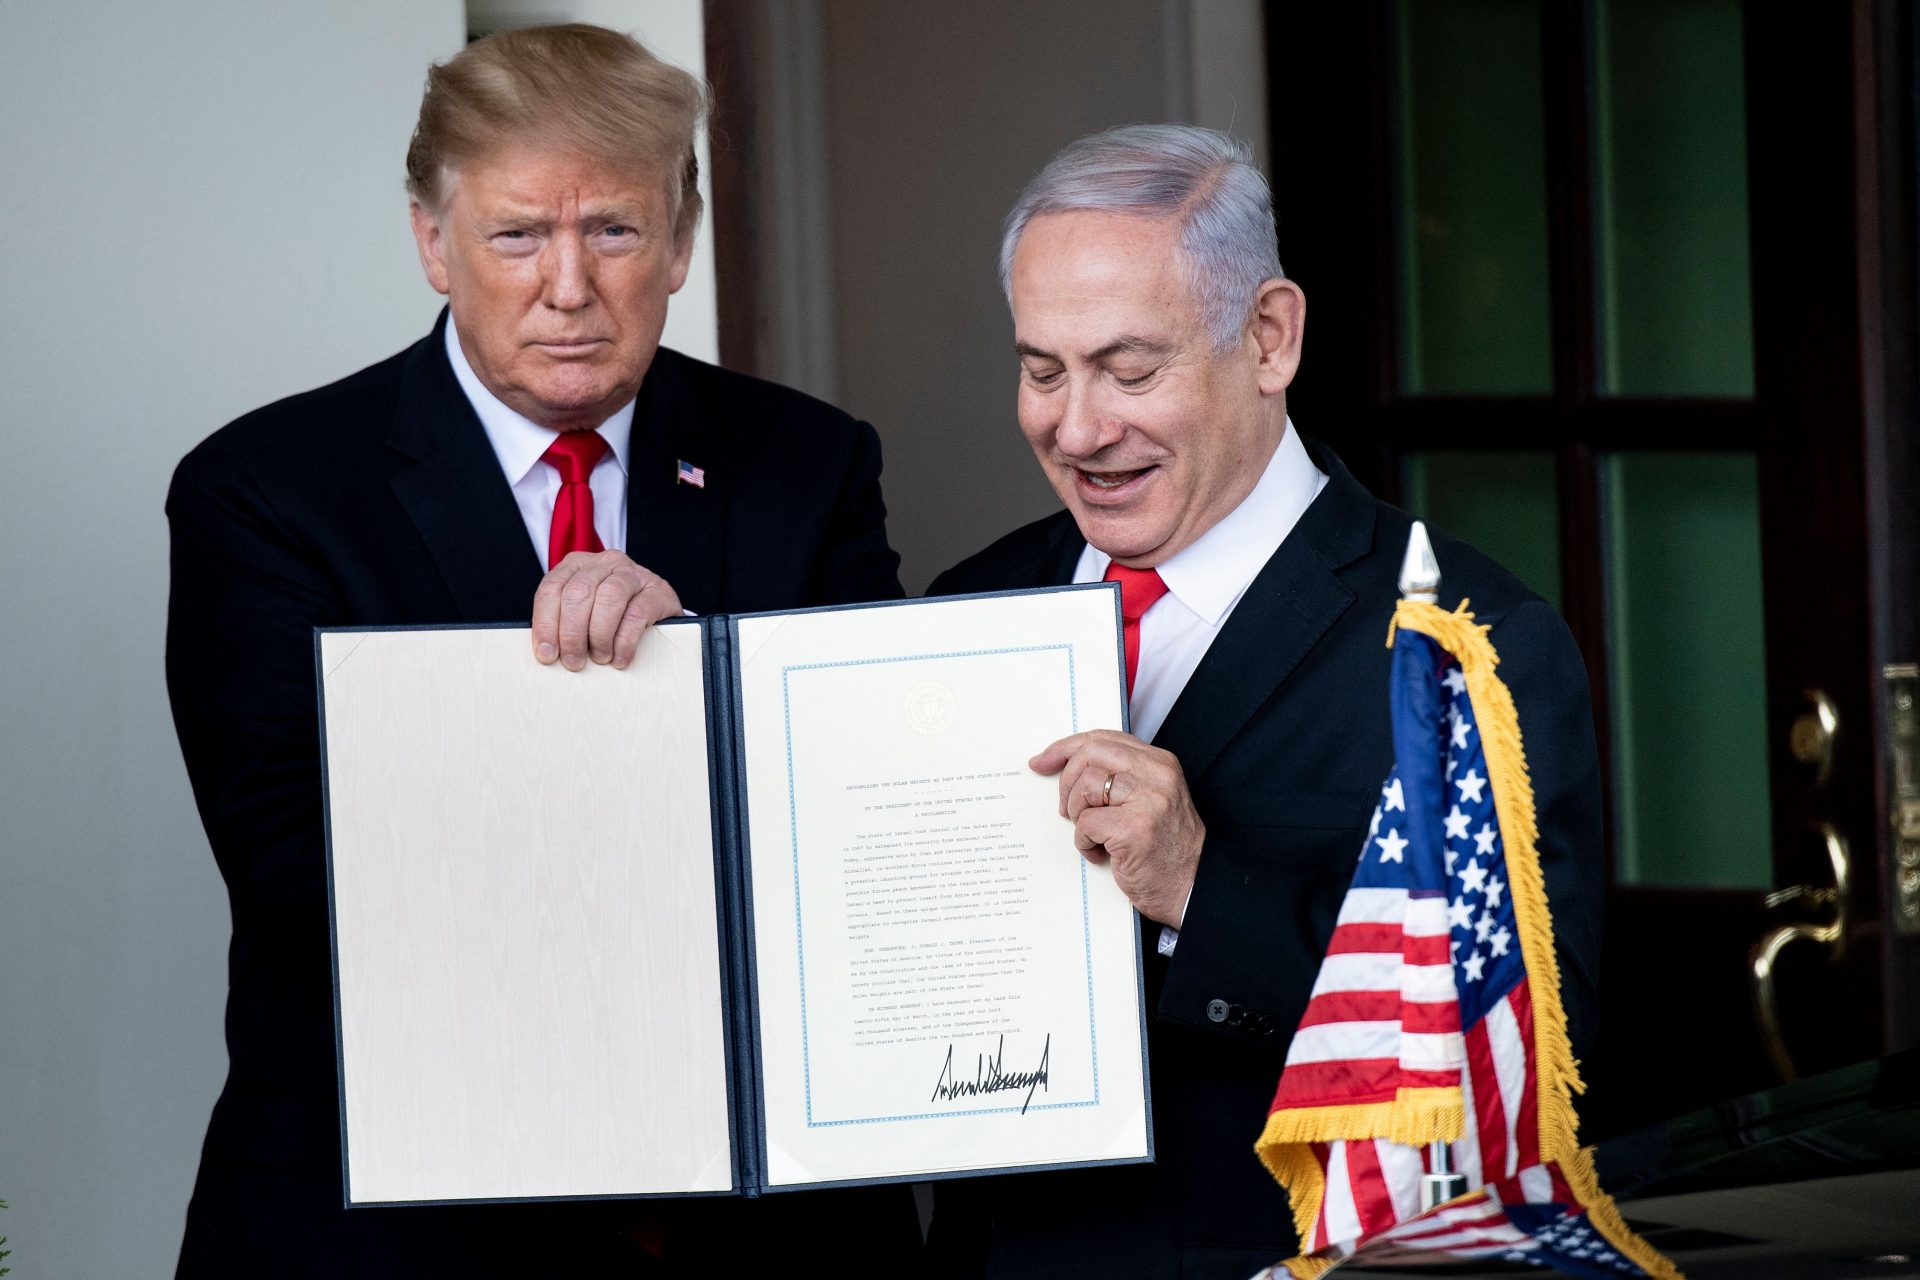 The Trump administration went all in on Israel